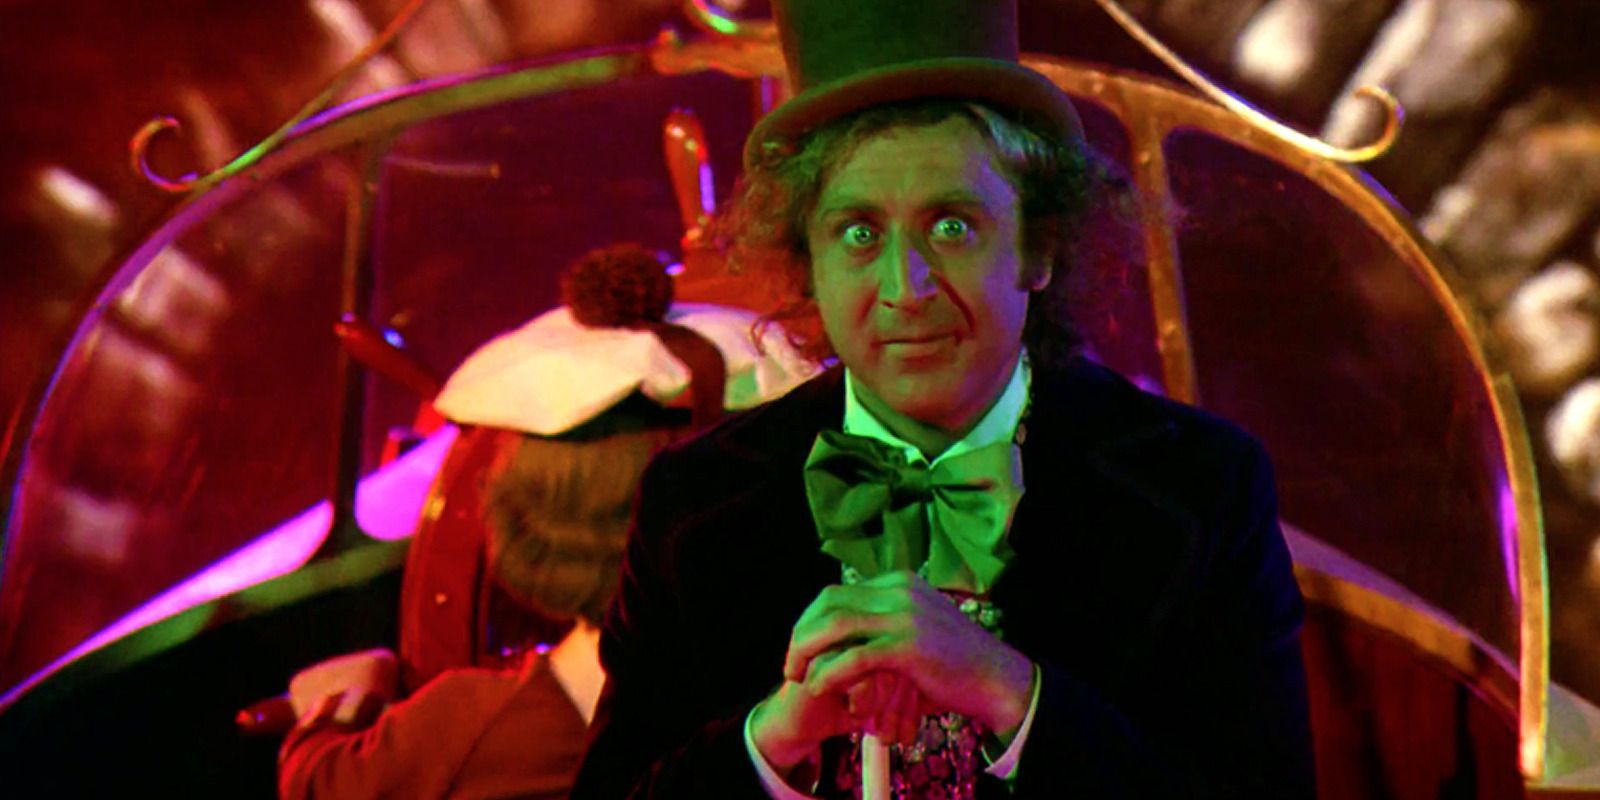 Gene Wilder in Willy Wonka and the Chocolate Factory walks through the colorful tunnel